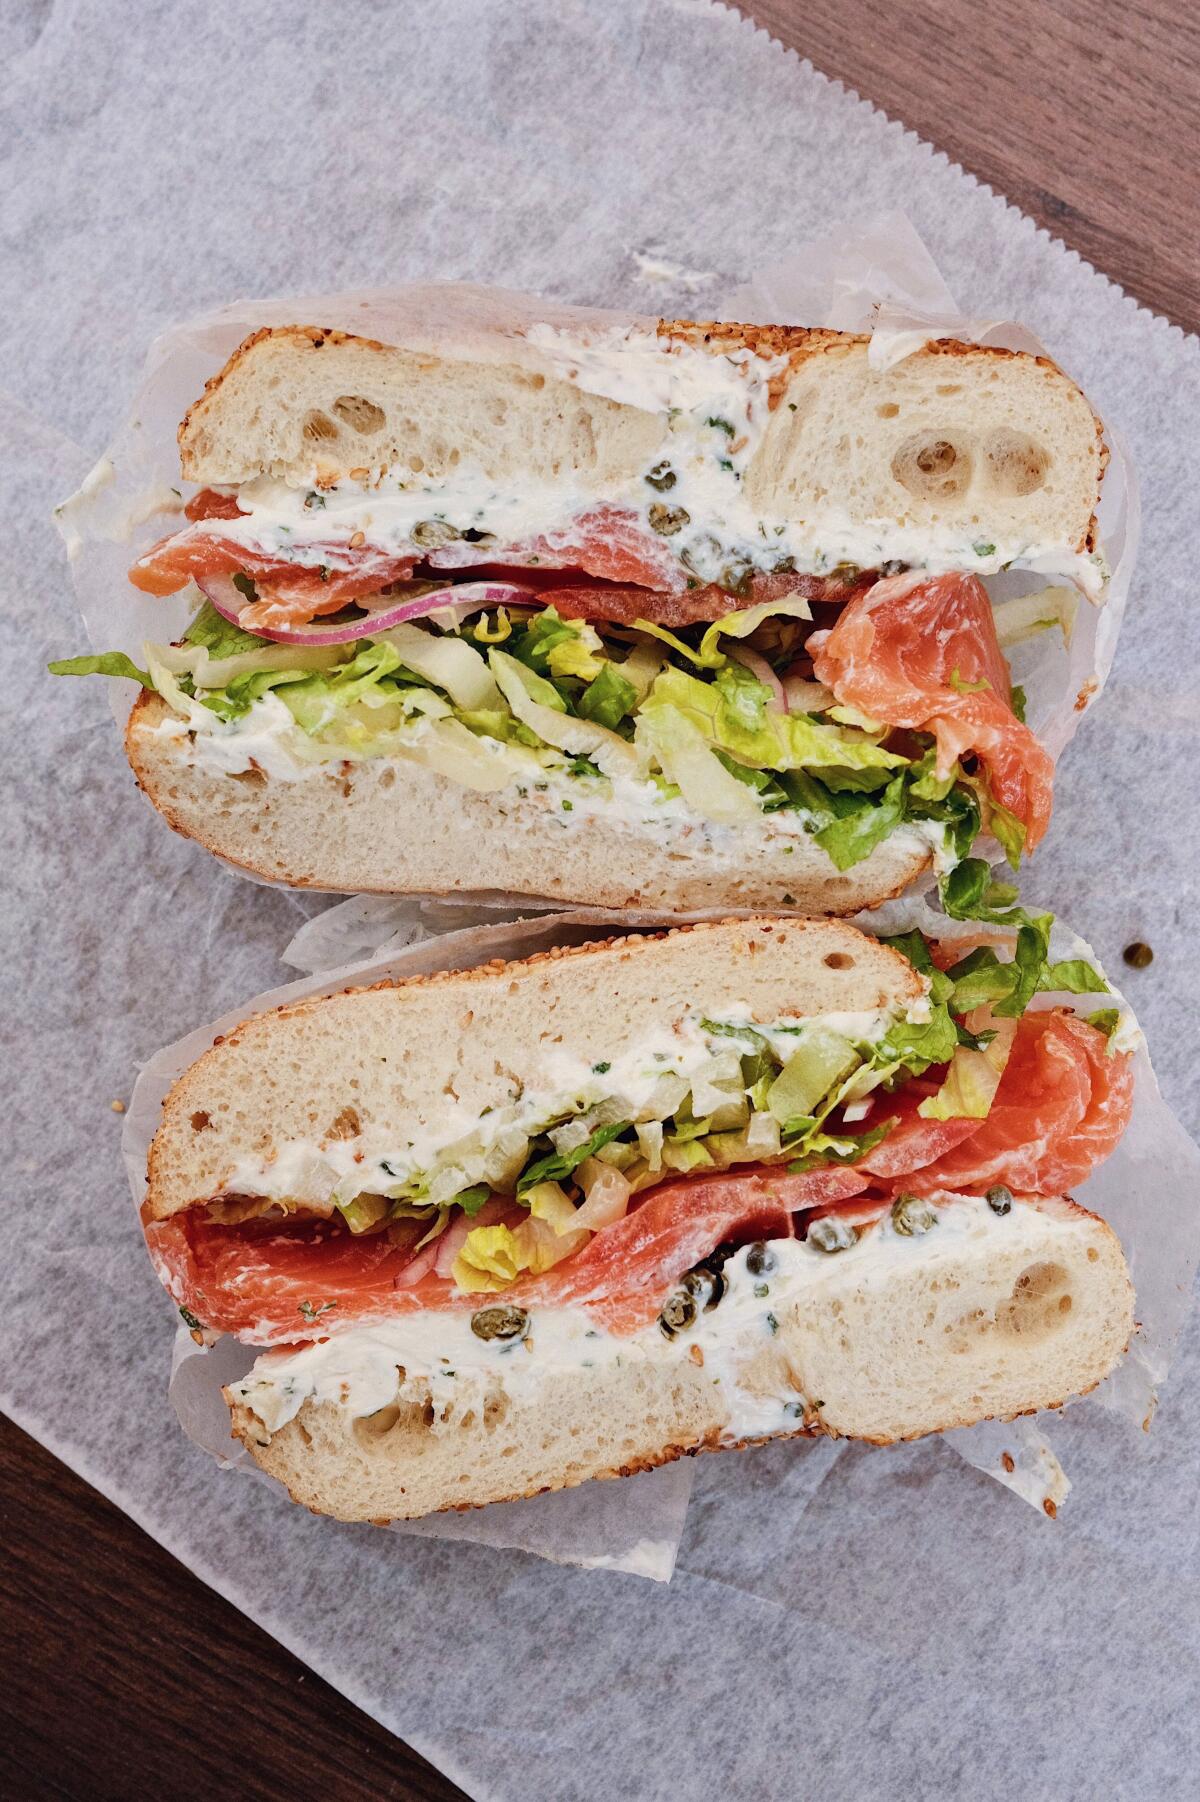 Two halves of a lox and cream cheese bagel sandwich with tomato, lettuce and red onion